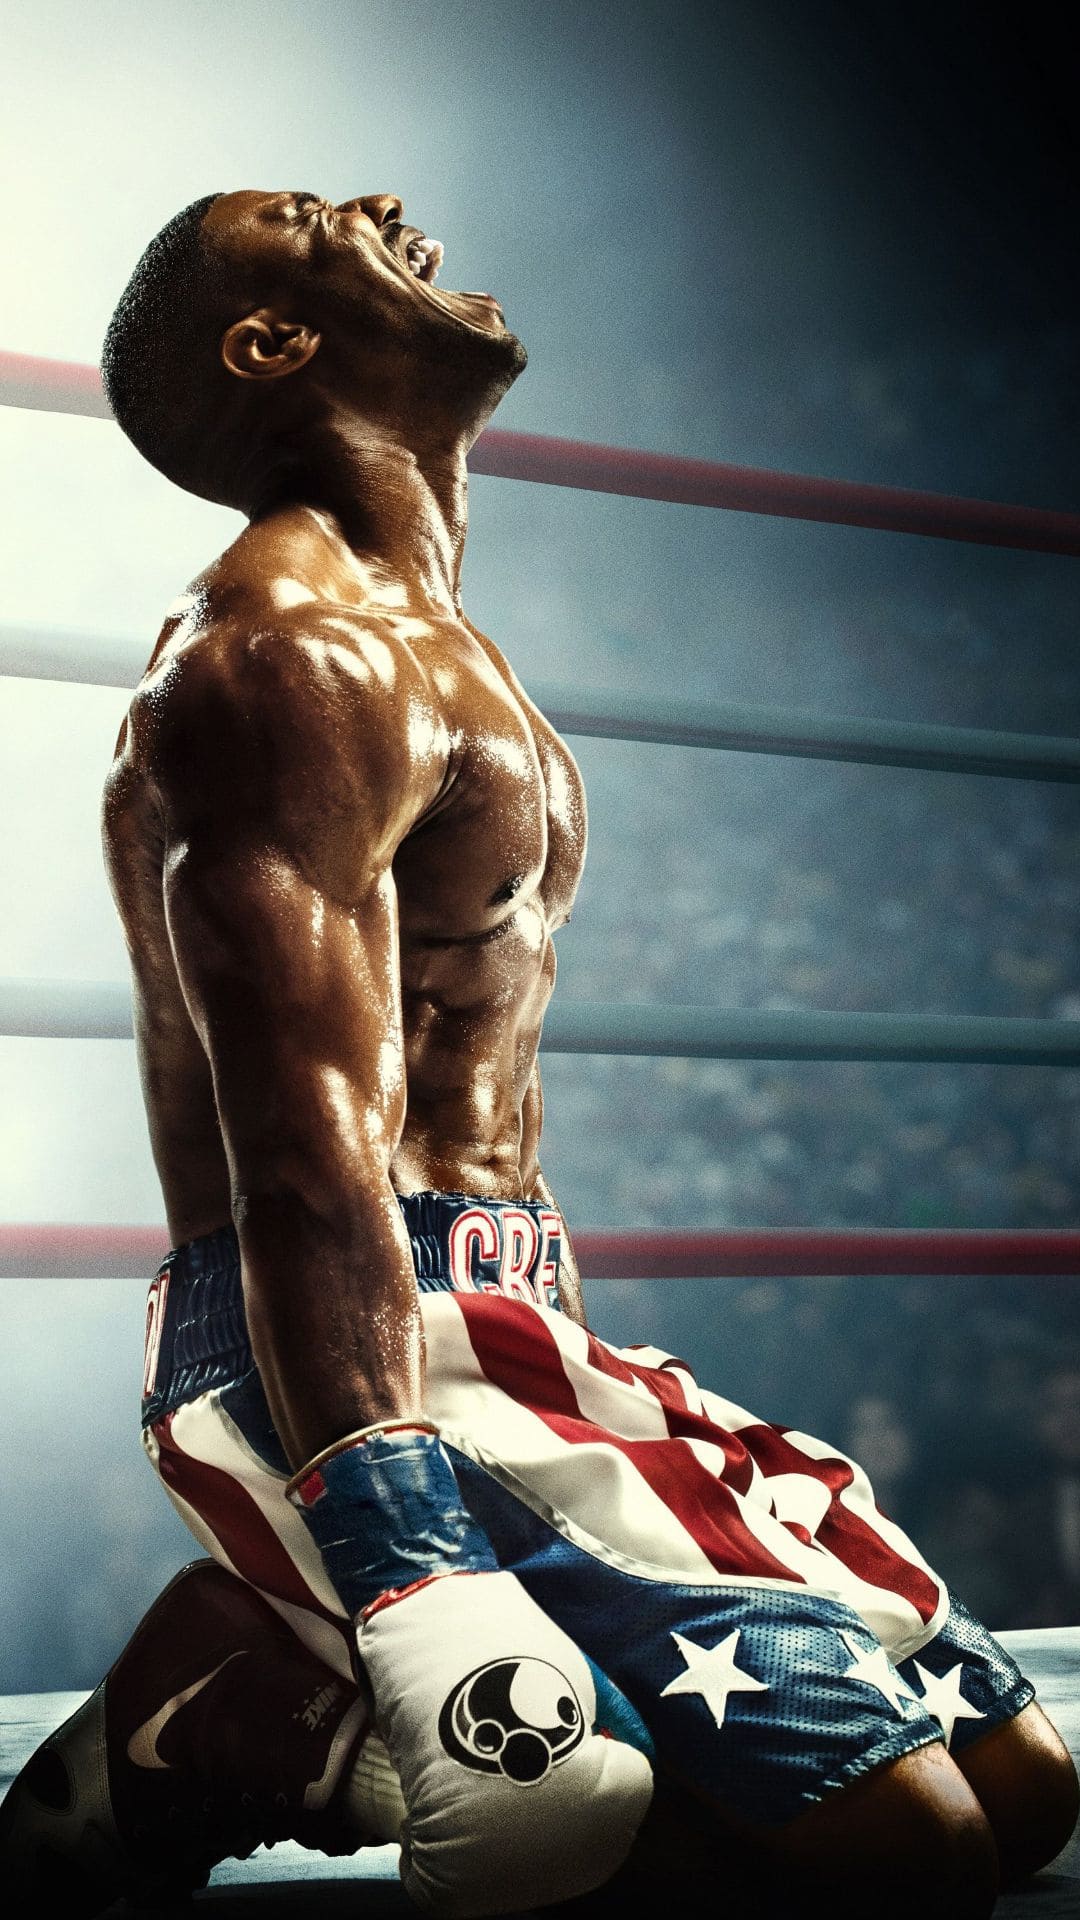 Boxing Wallpaper Best Boxing Background Download [ 35 + HD ]